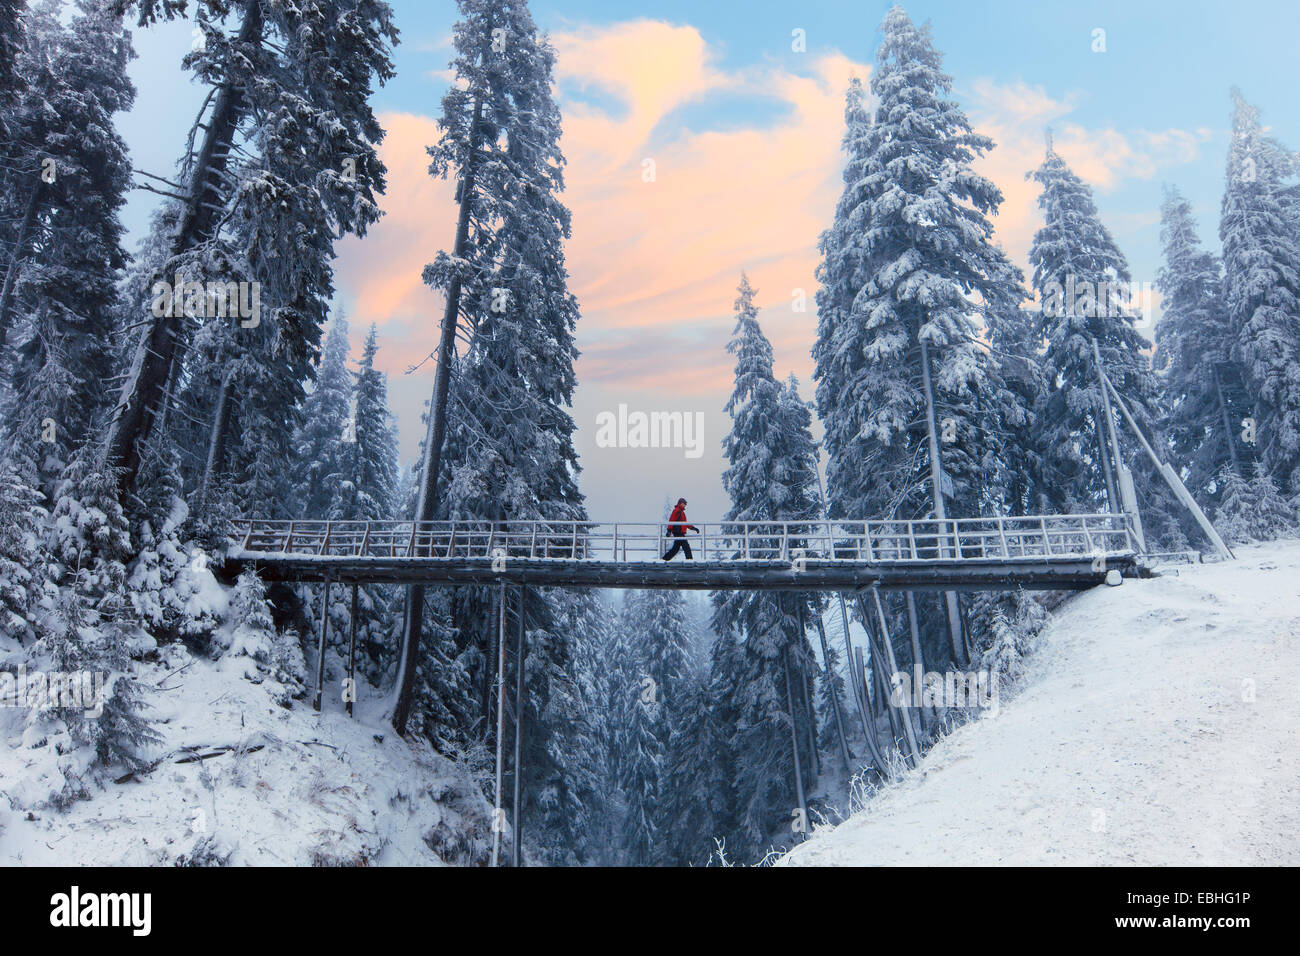 Bridge over the snowy mountains surrounded by pines Stock Photo